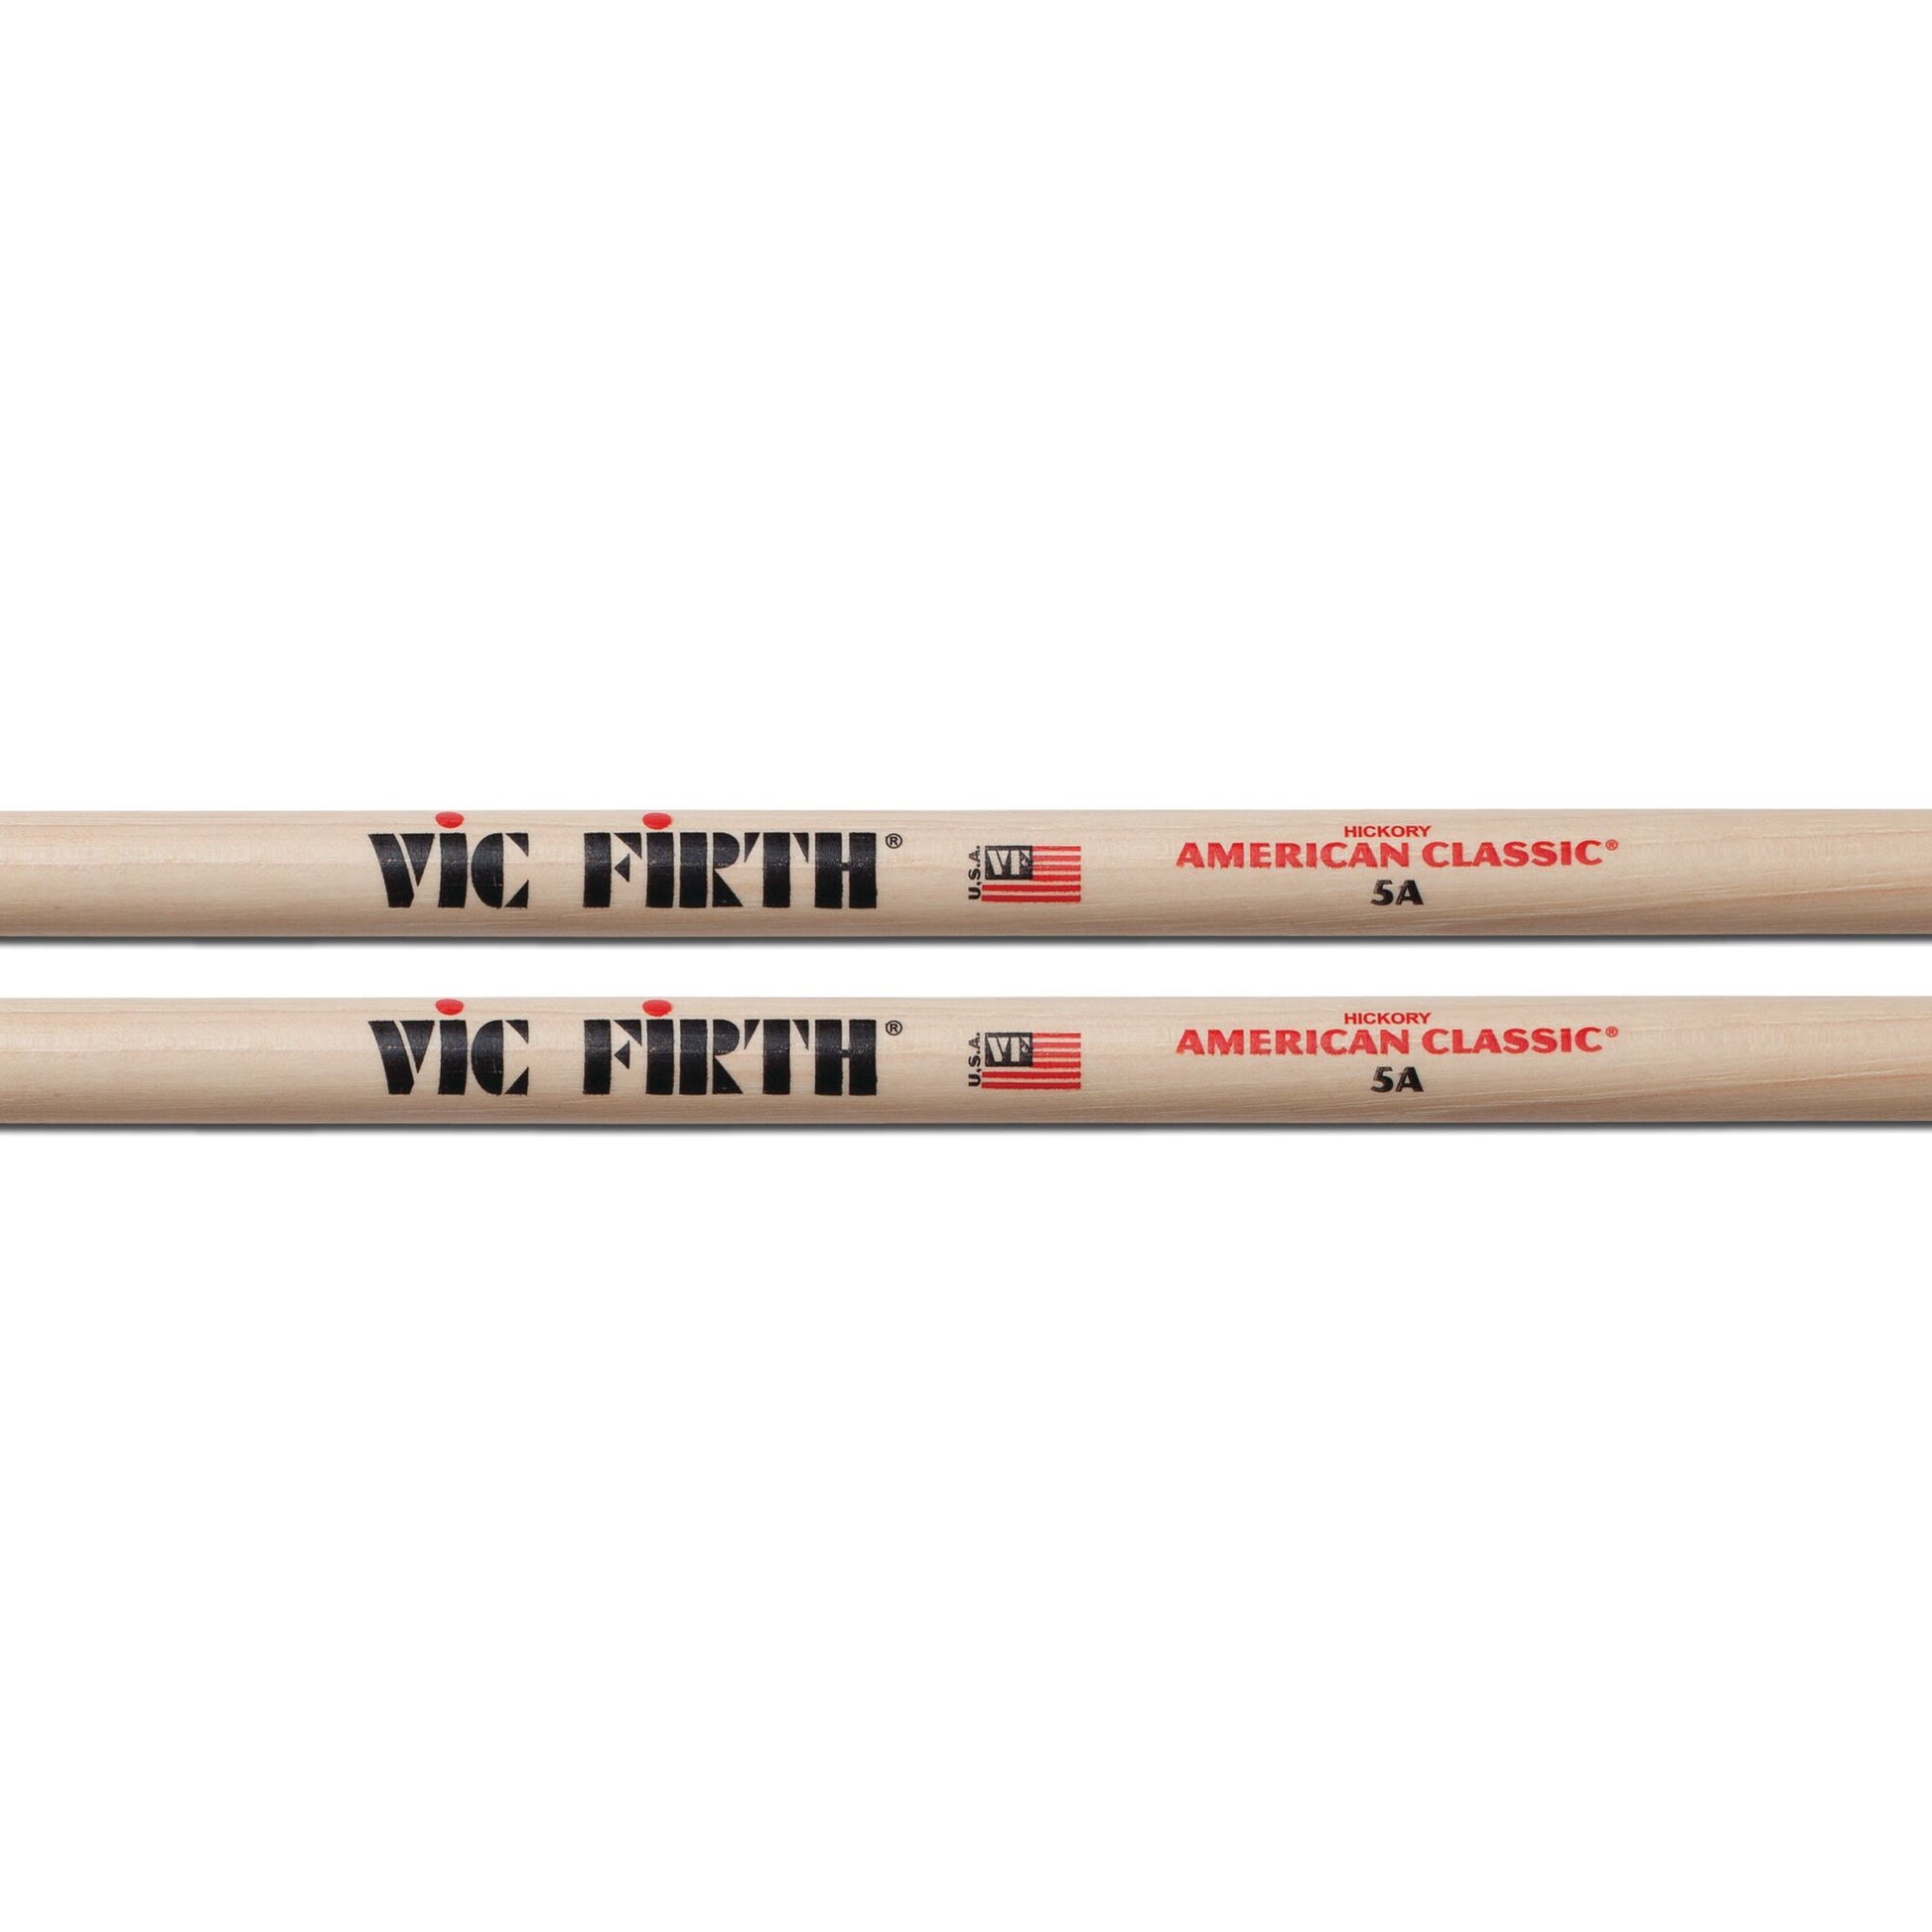 Vic-Firth 5A baquetas, American Classic, punta de madera favorable buying  at our shop